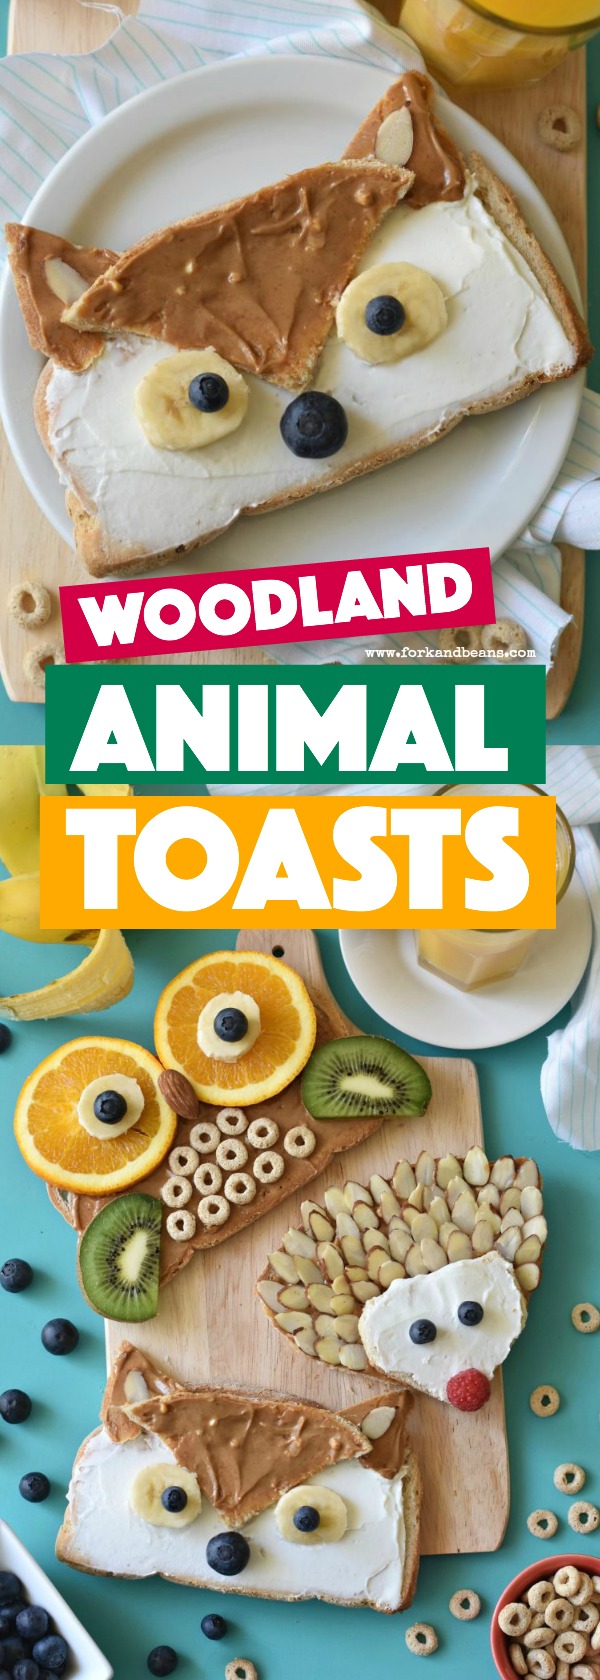 Woodland Animal Toast - Fork and Beans